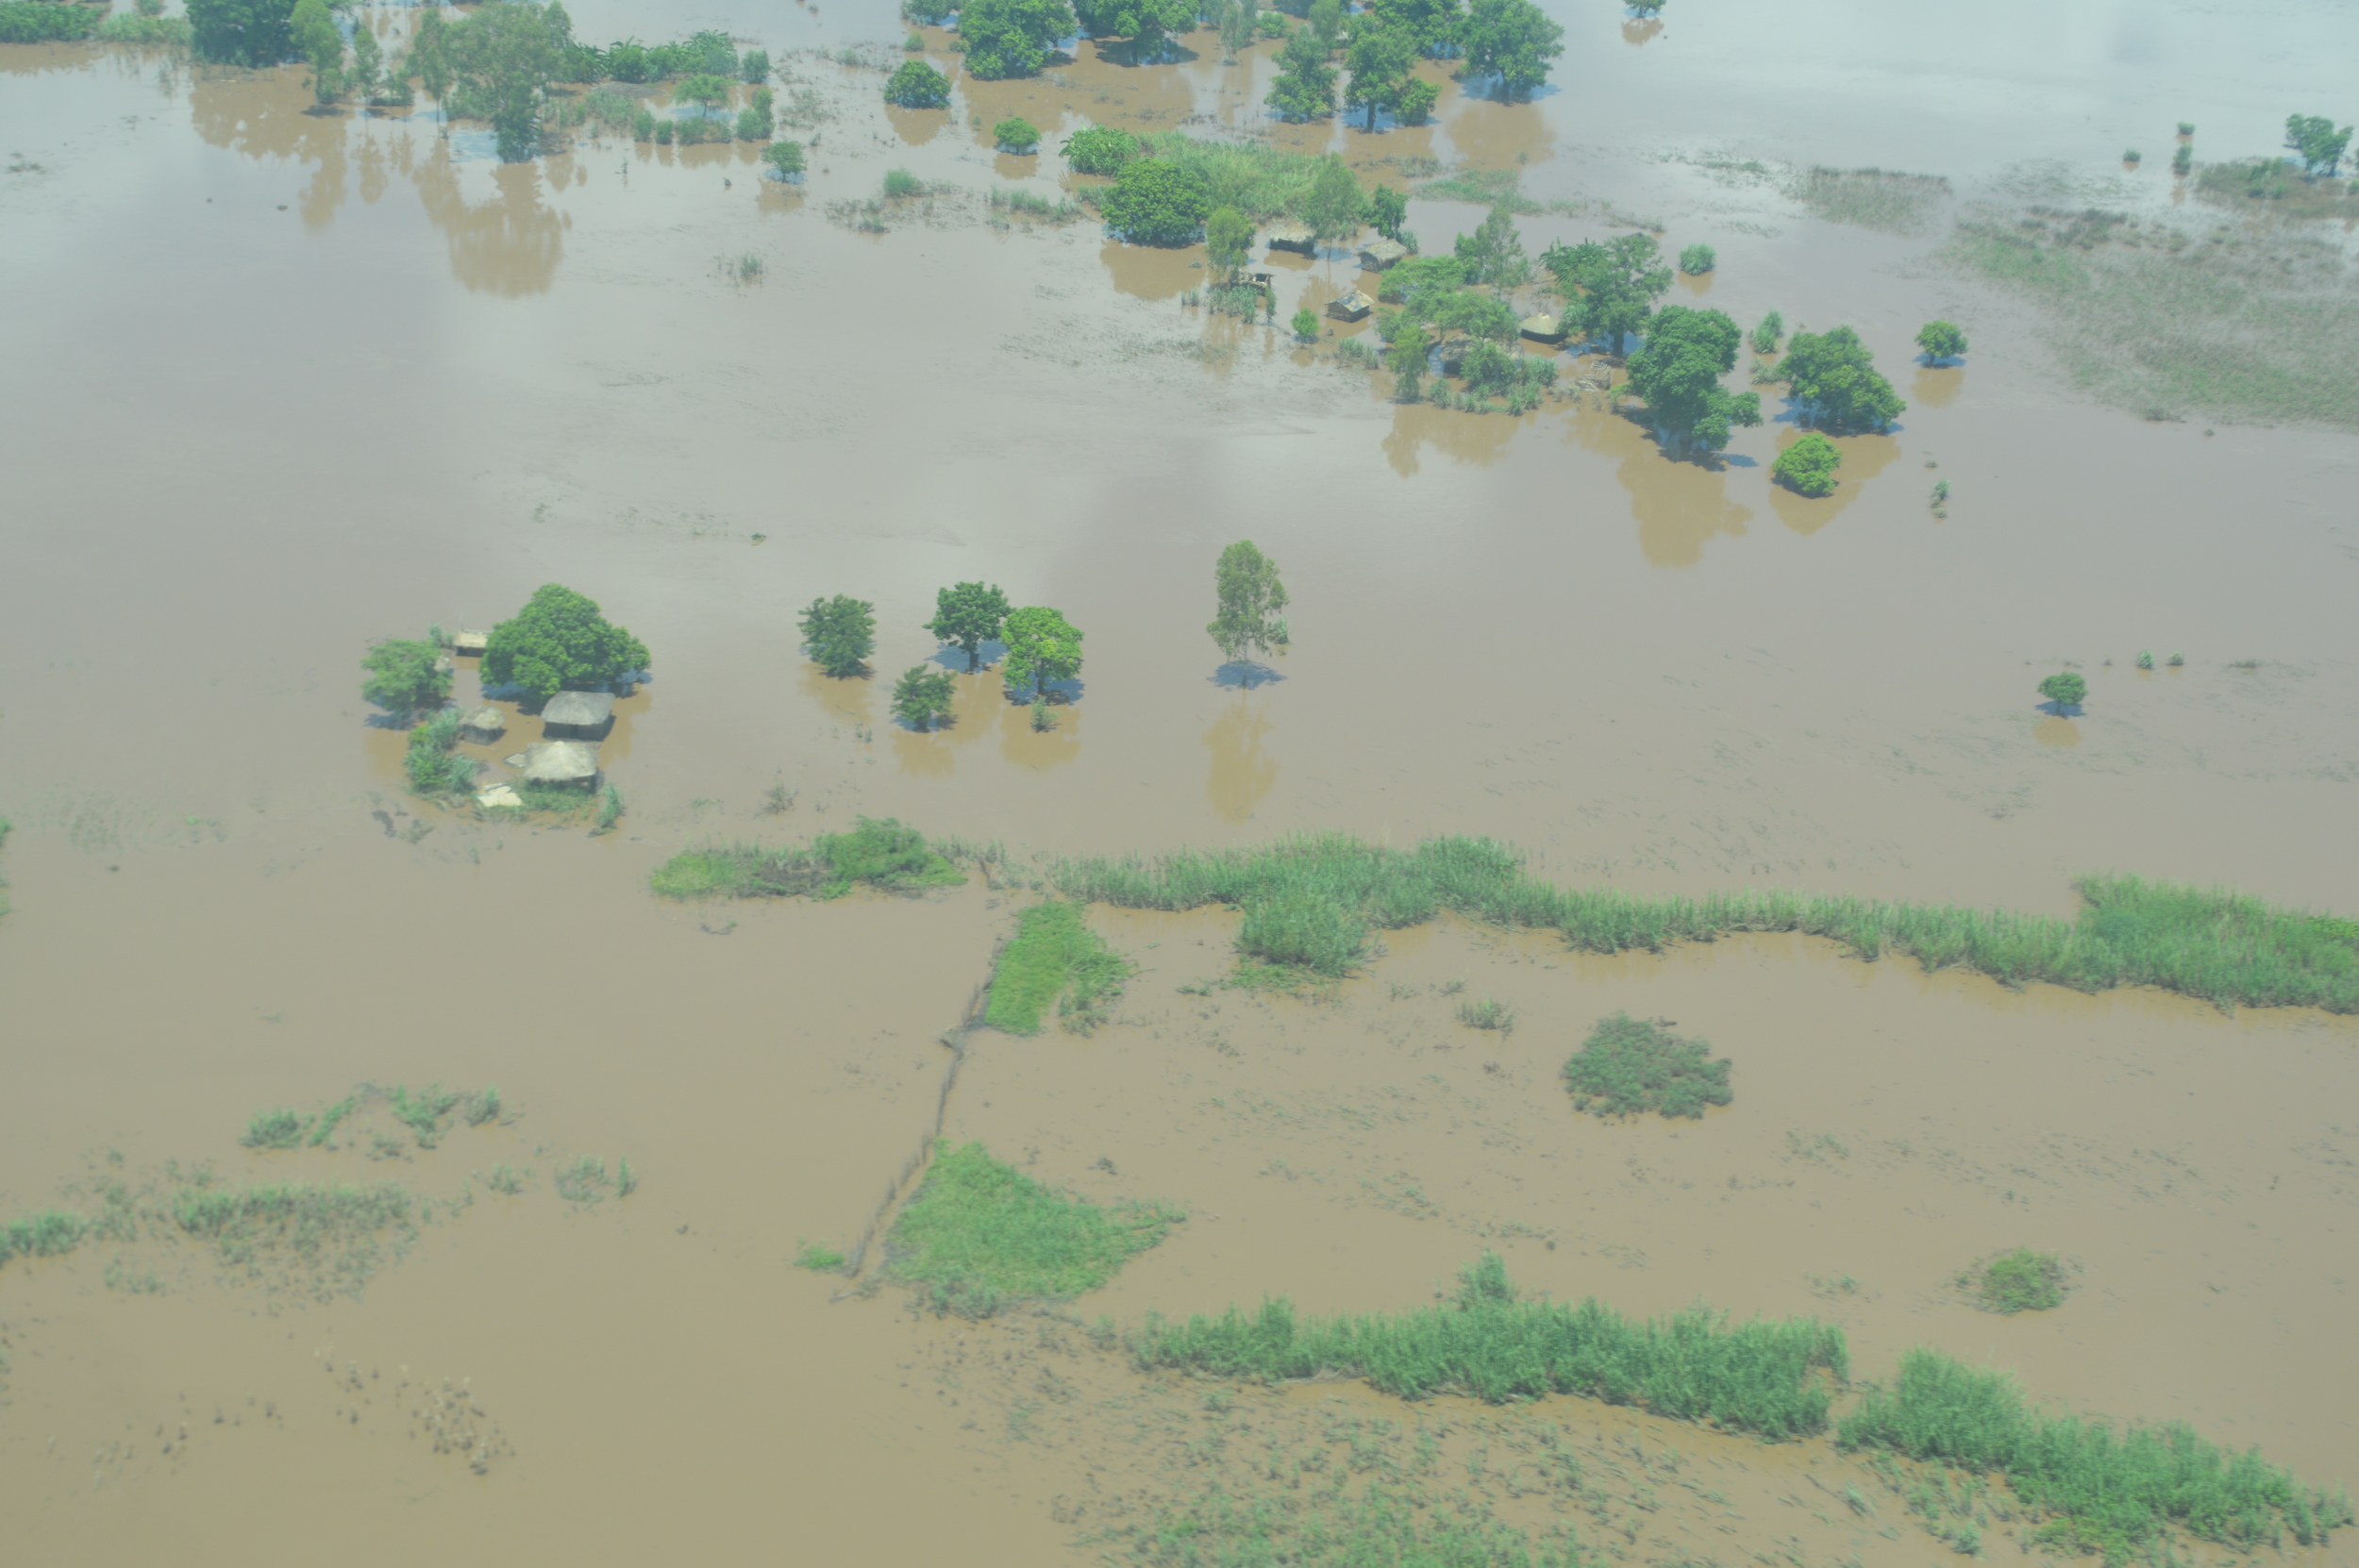 A third of Malawi's territory has been affected by heavy rains and floods.